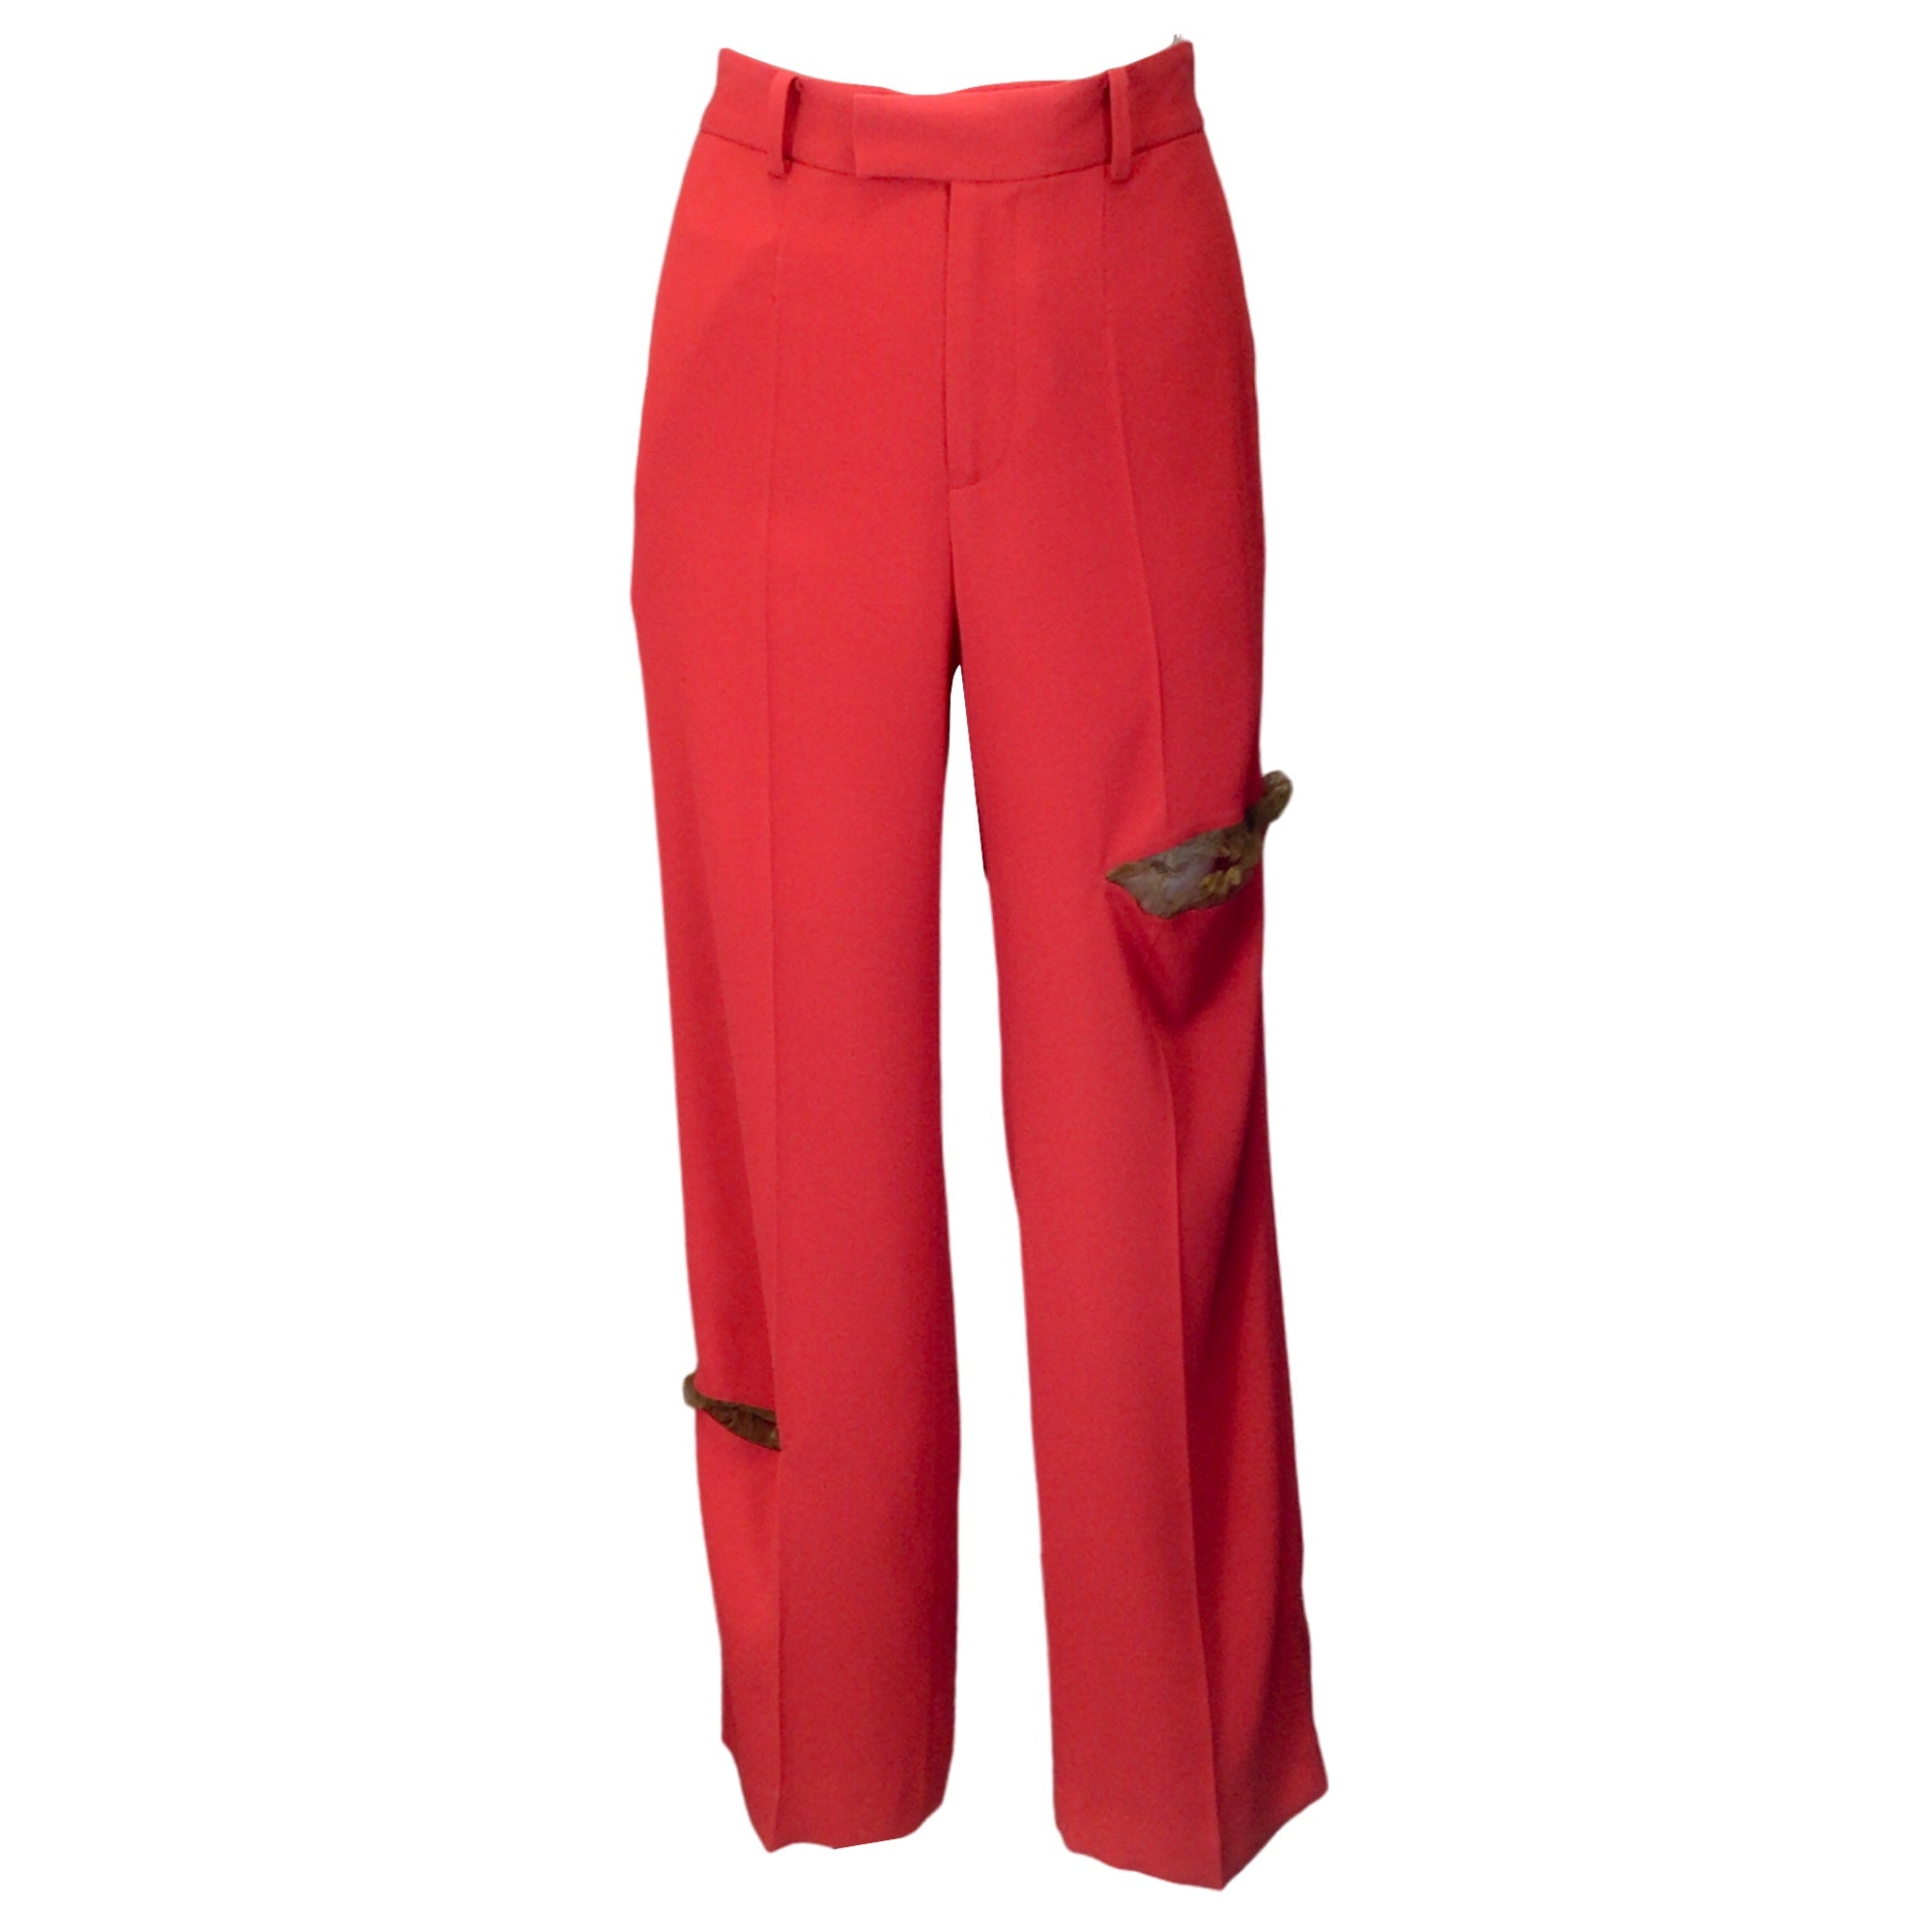 Undercover by Jun Takahashi Red / Tan Lace Trimmed Crepe Trousers